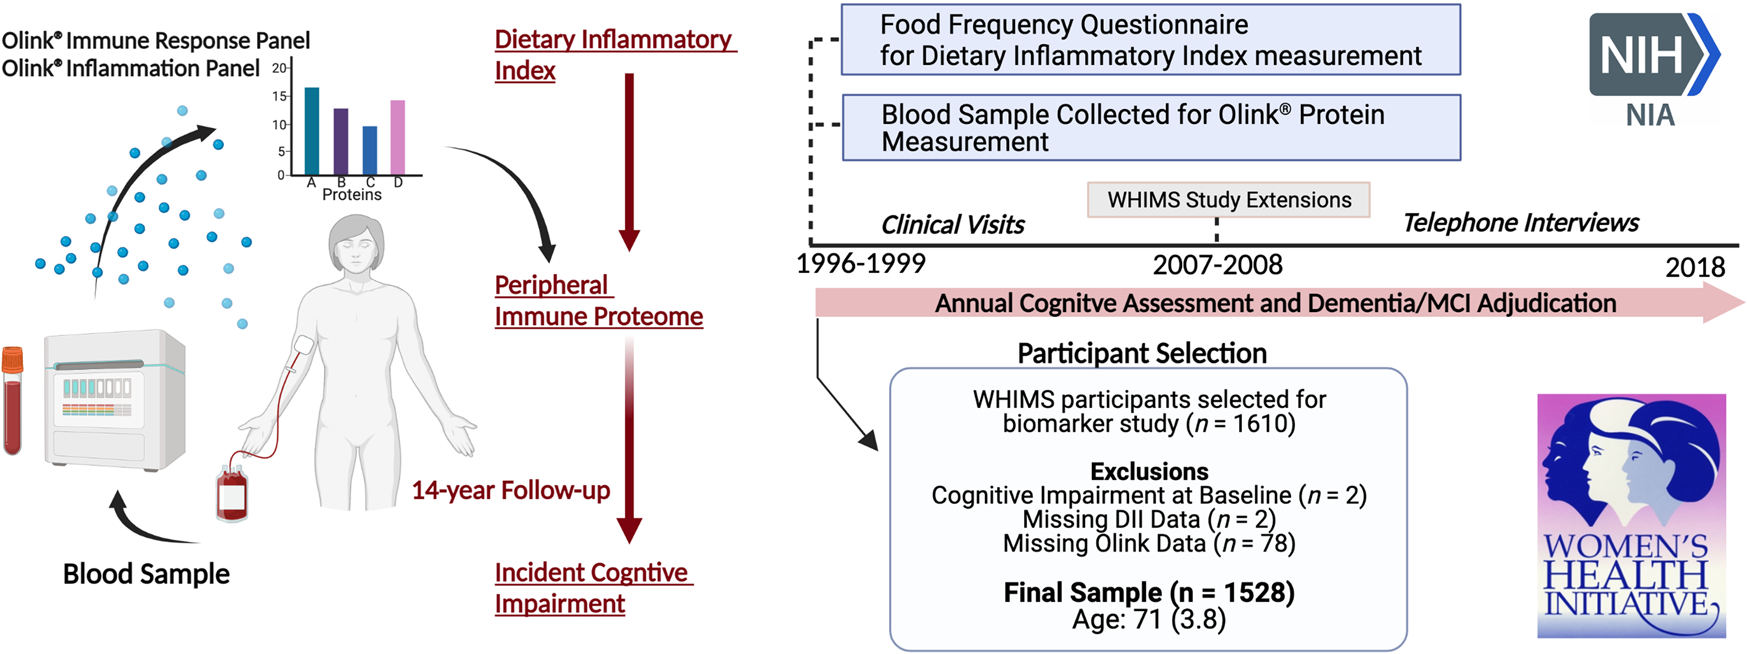 Clinical outcomes subject to formal monitoring in the WHI Hormone